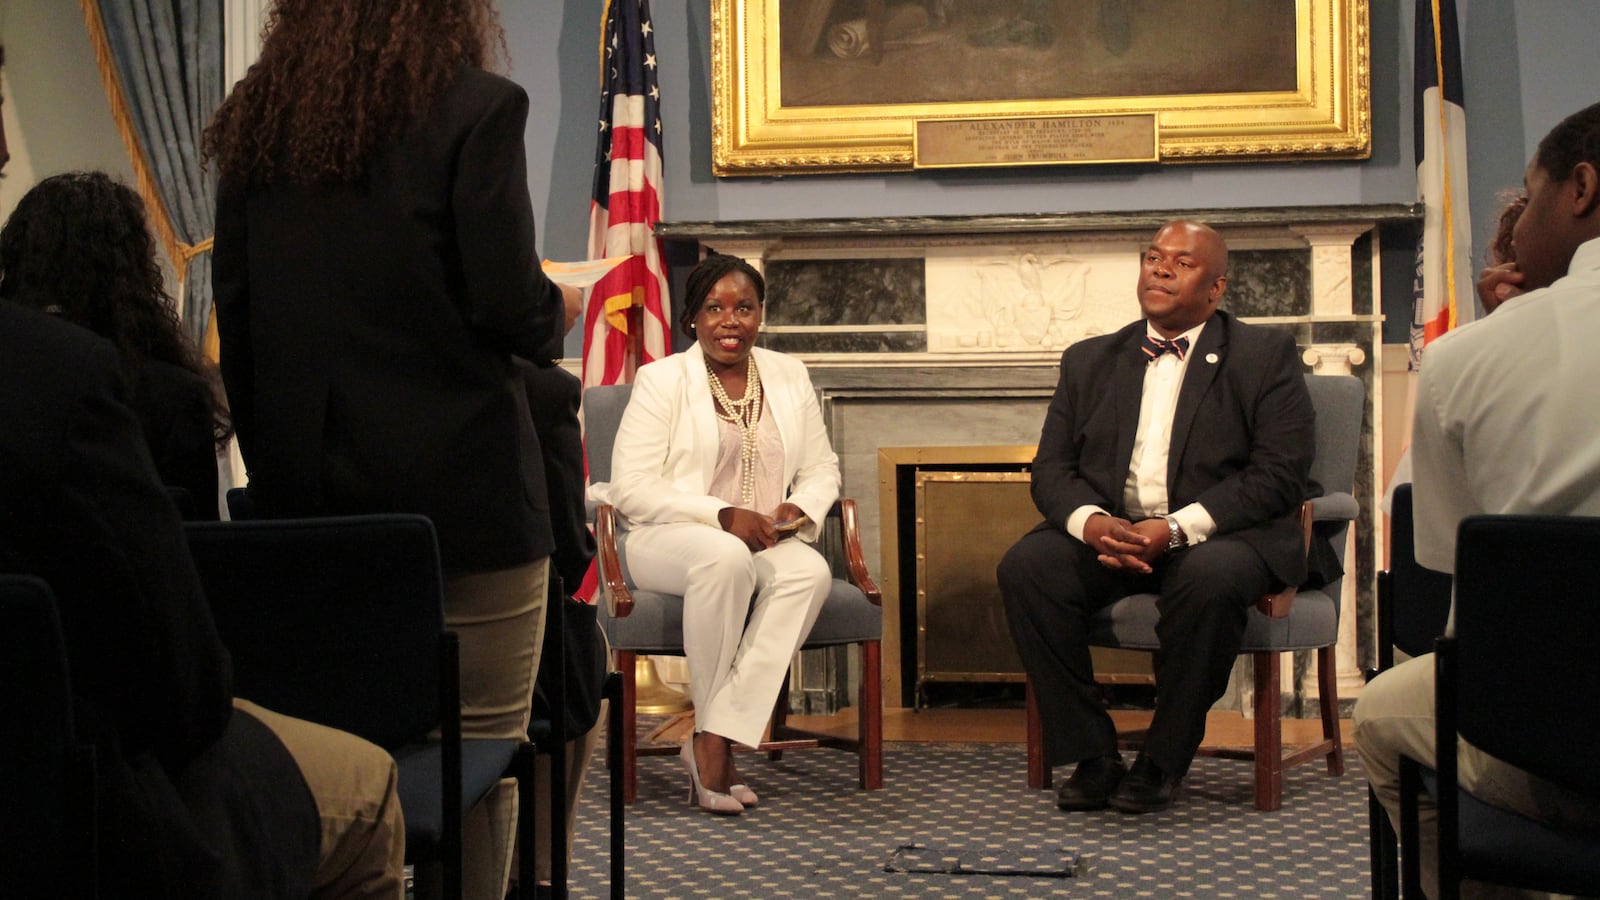 Deputy Mayor Richard Buery sat down with Samantha Pugh, the principal of the Charter High School for Law and Social Justice, to answer questions asked by the Bronx school’s inaugural class at City Hall last week.